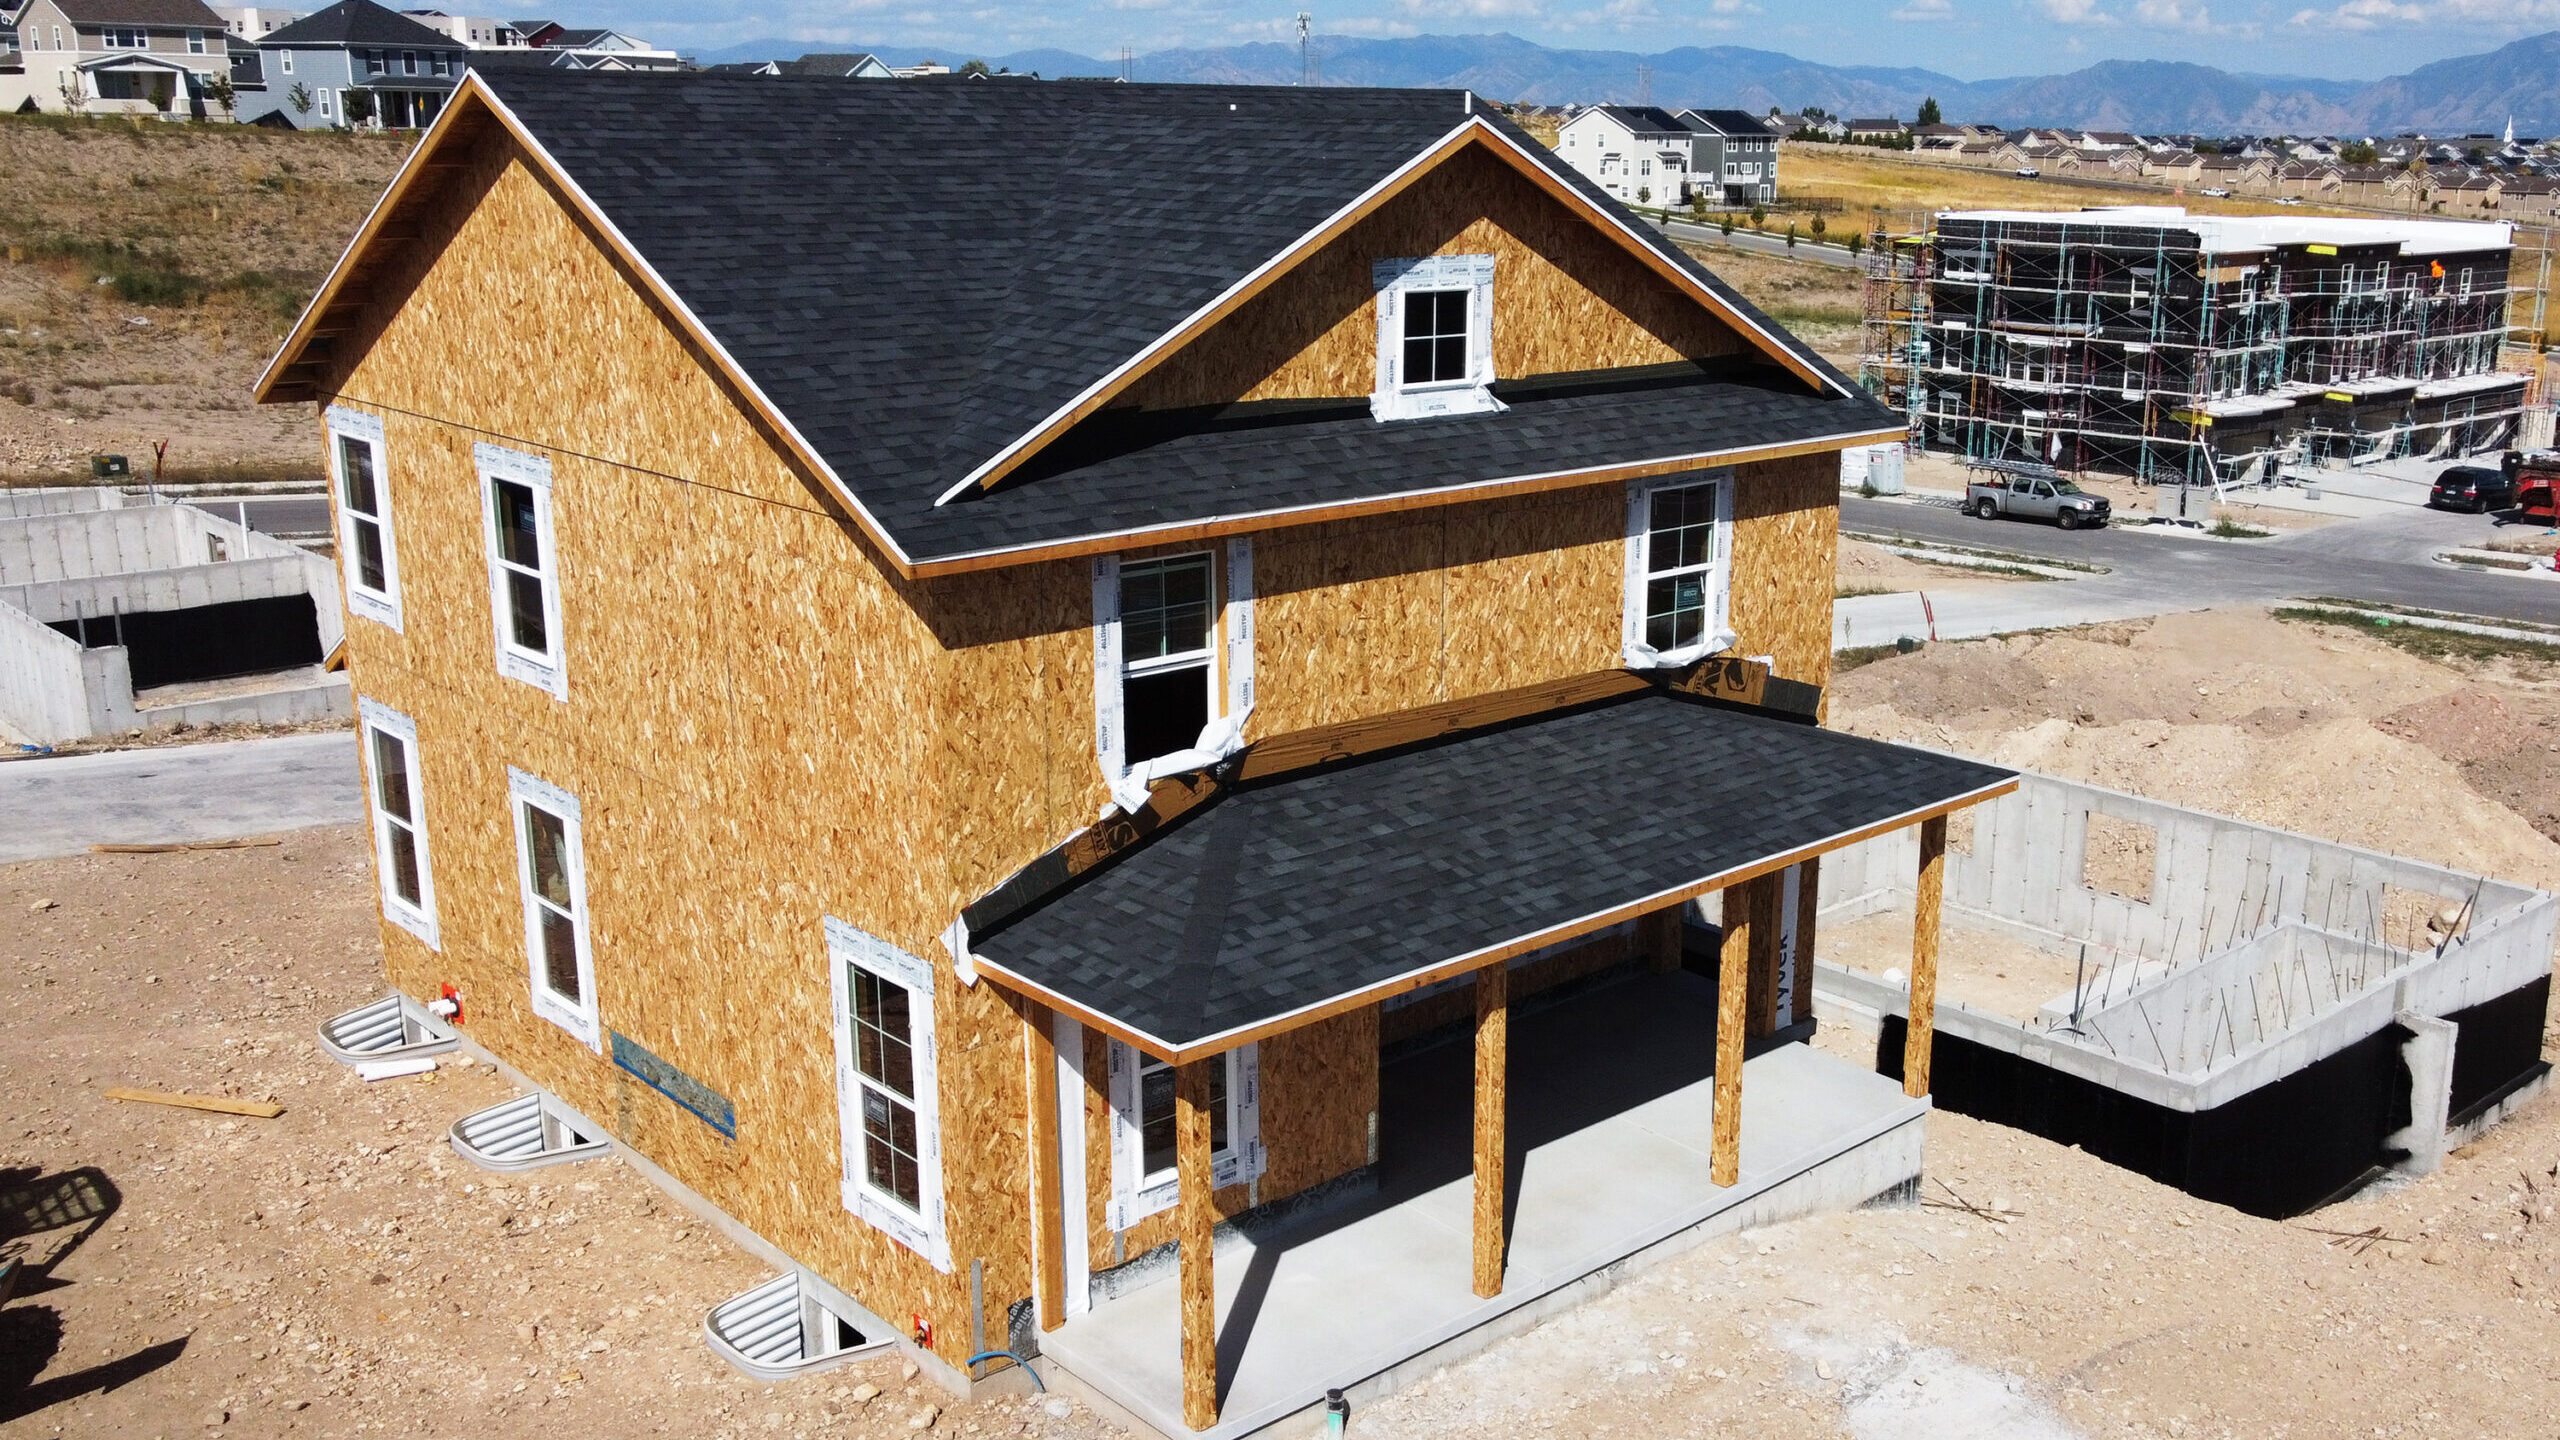 Image of new single family homes under construction in the South Jordan area of the Salt Lake Valle...